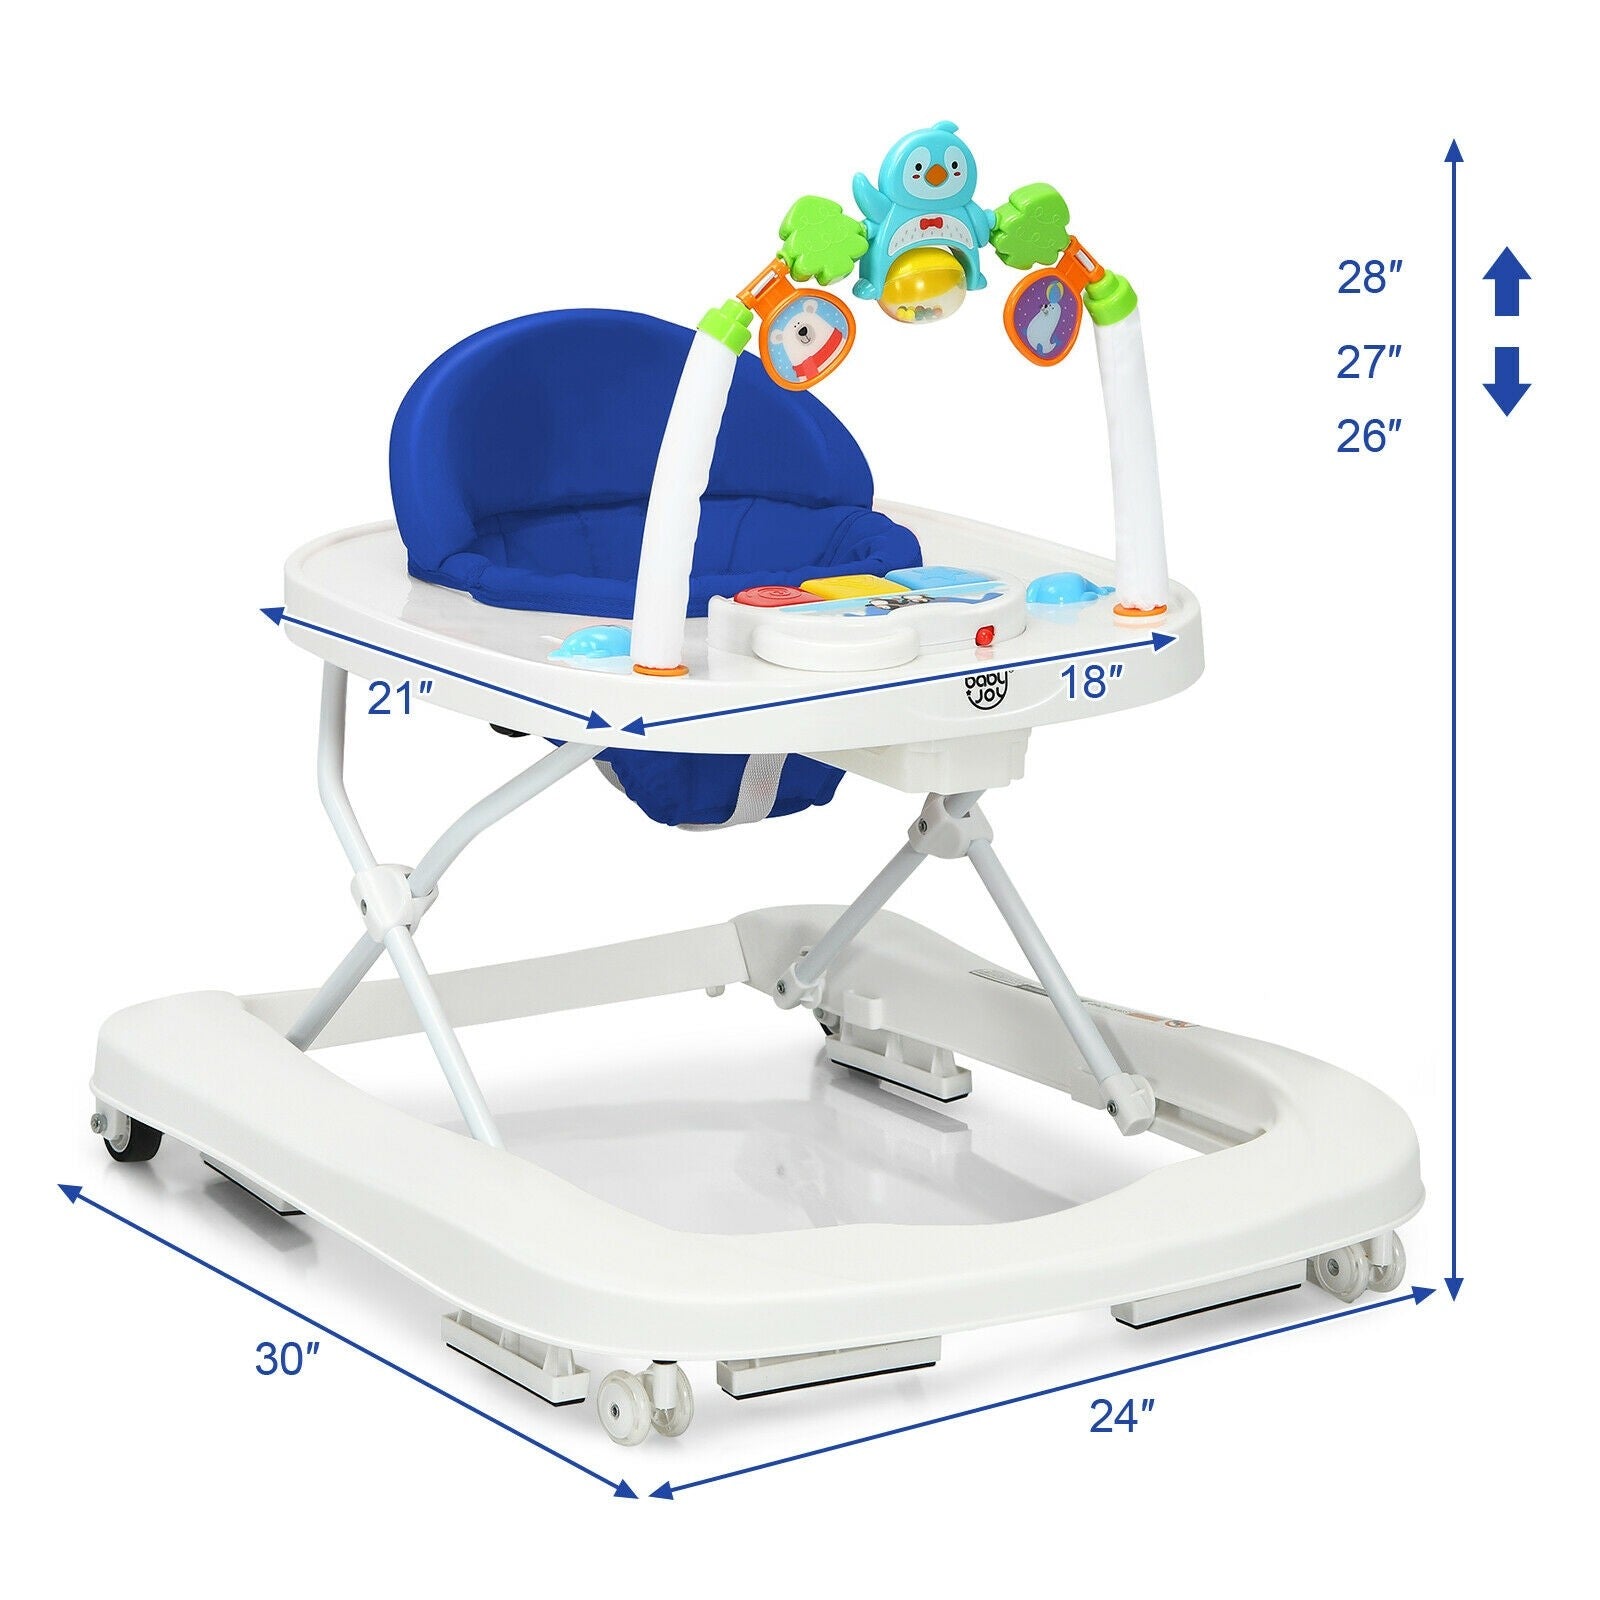 BABY JOY Baby Walker, 2 in 1 Foldable Activity Behind Walker with  Adjustable Height & Speed